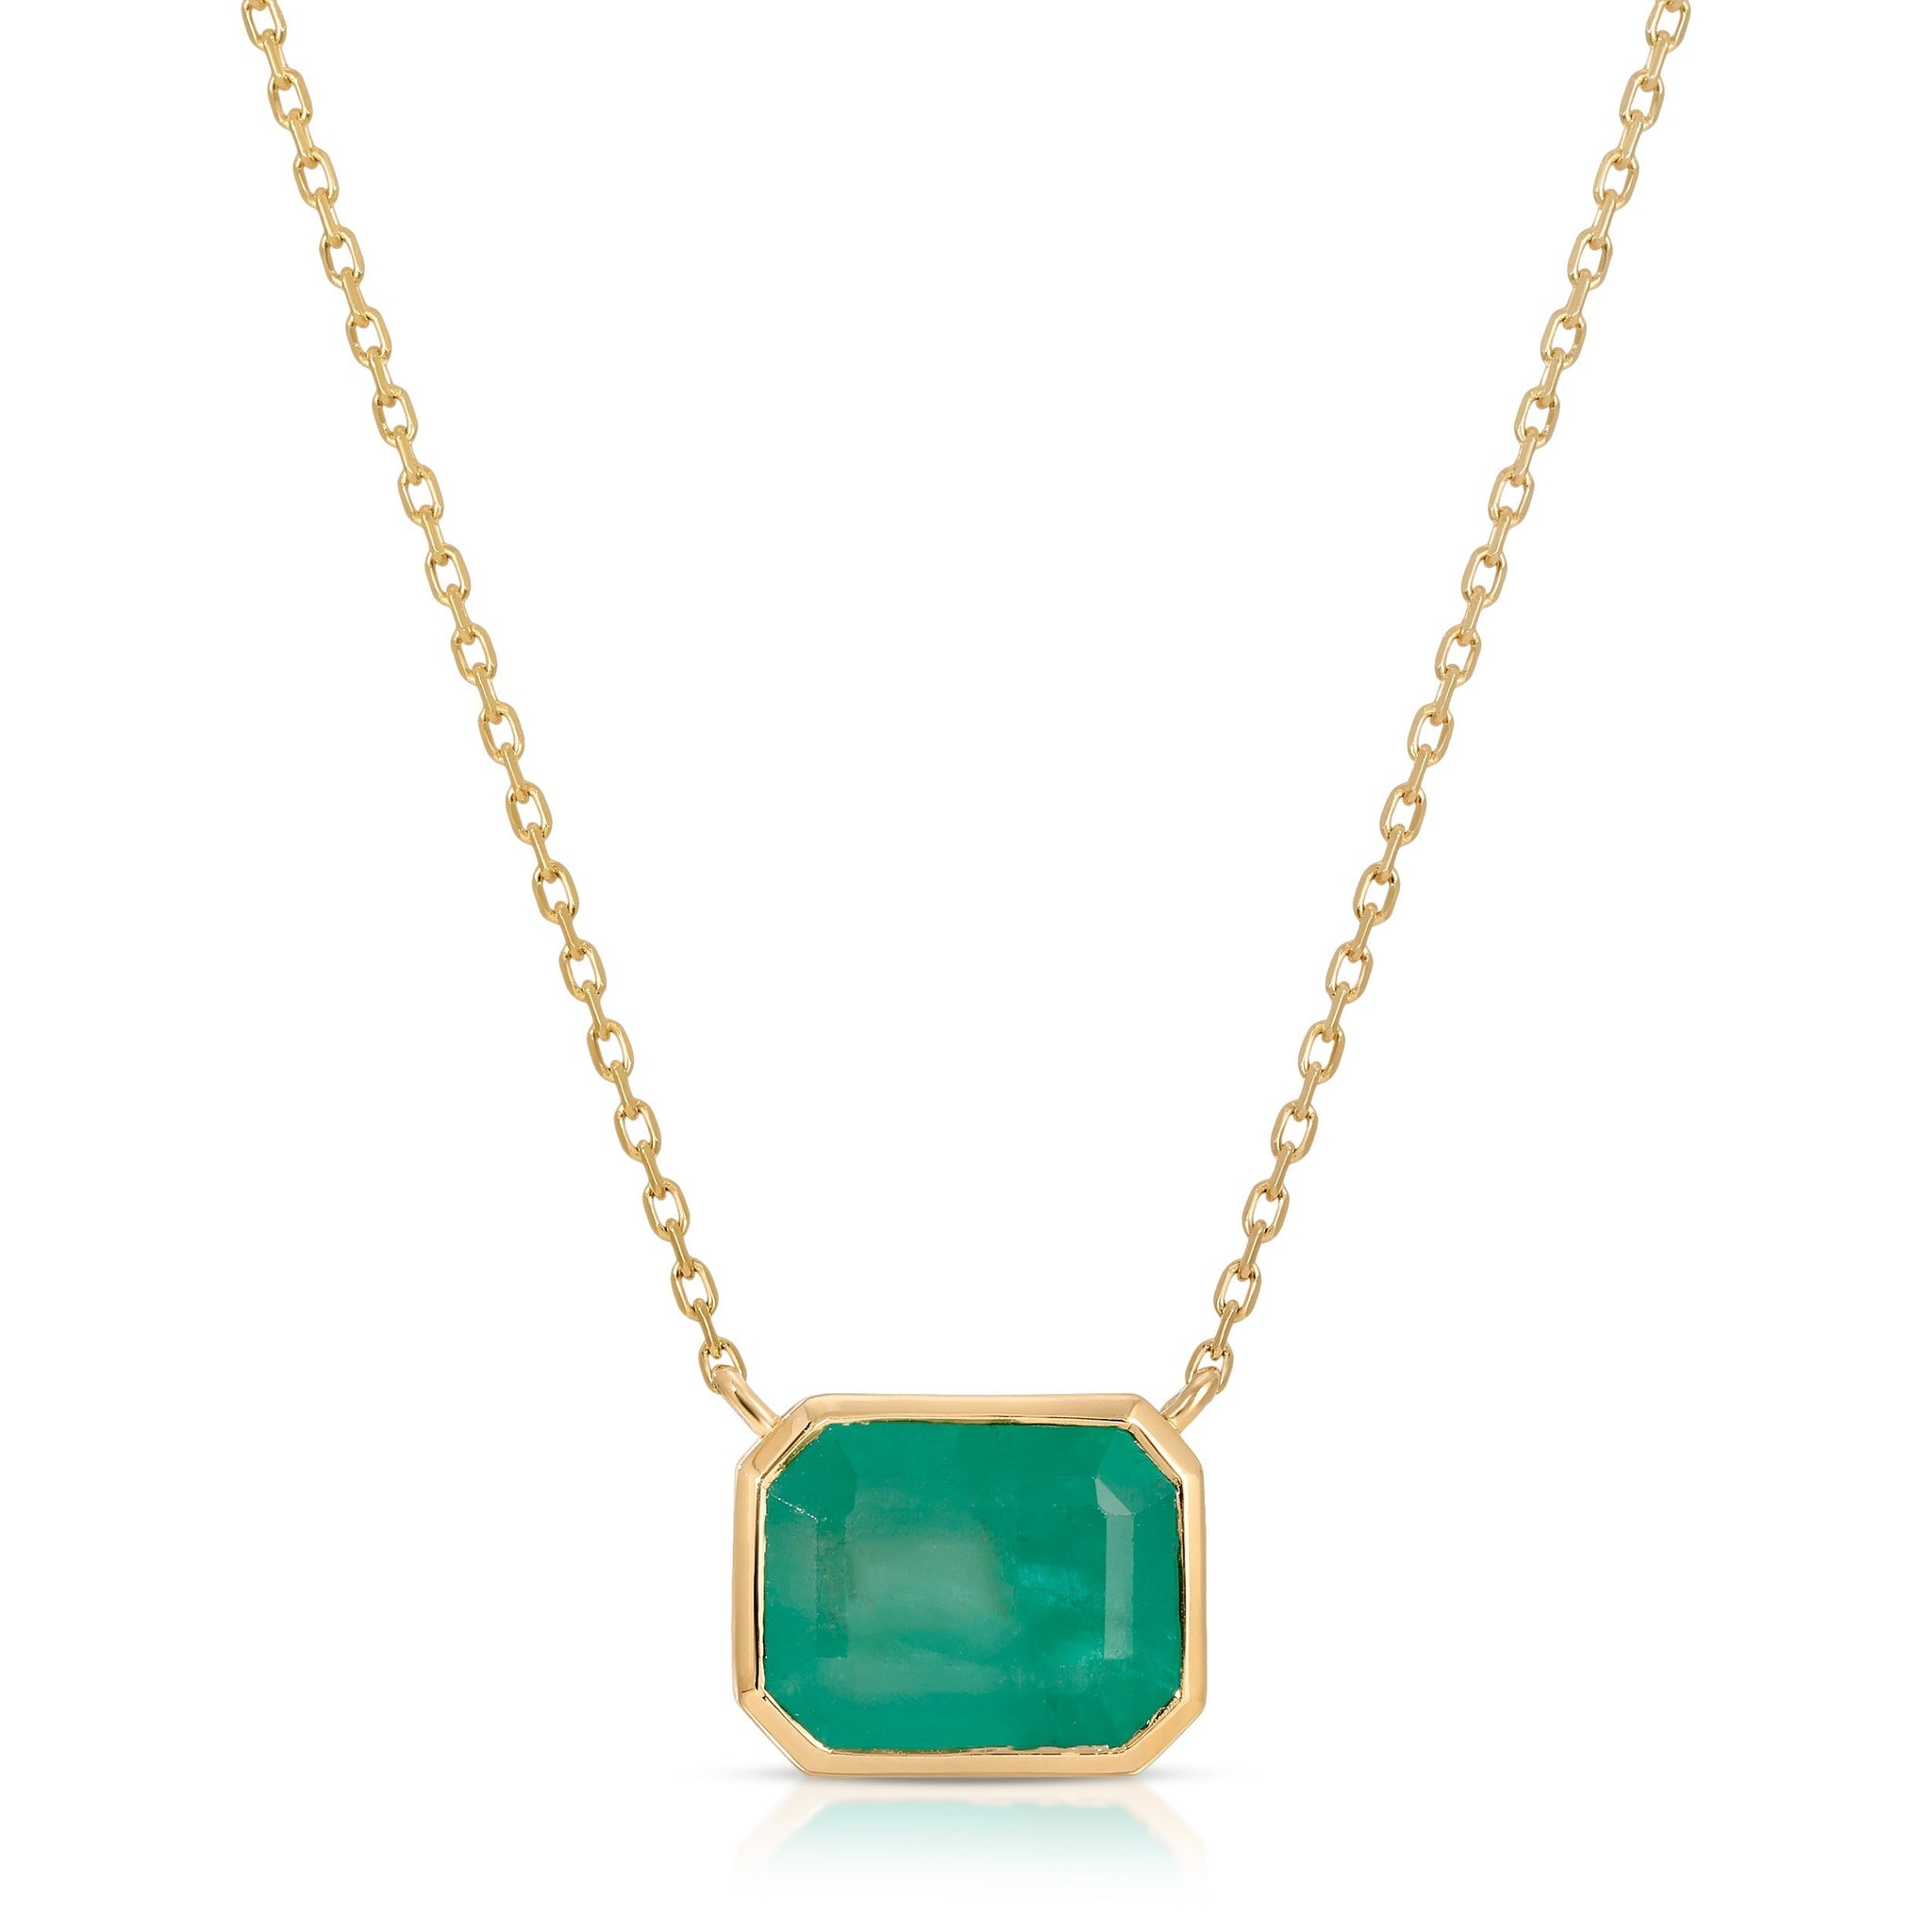 Green Majesty Collection with 3.47 CT Natural Emerald Gemstone Center set on 14K Yellow Gold 3.43 Gr